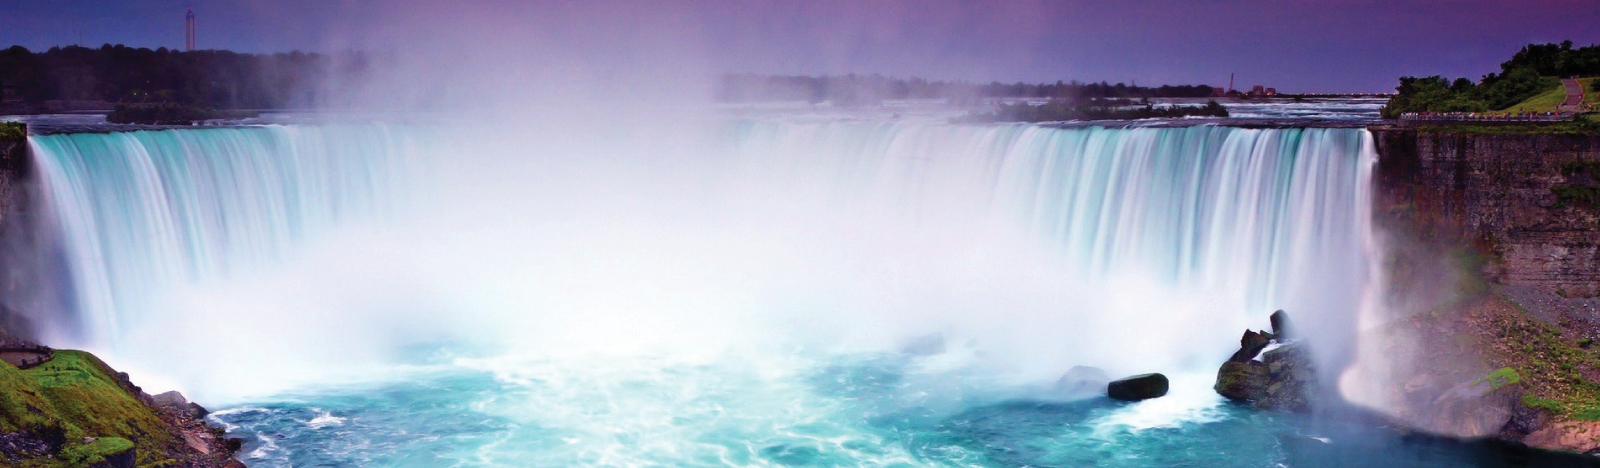 Hotel Packages New Year’s Eve Niagara Falls